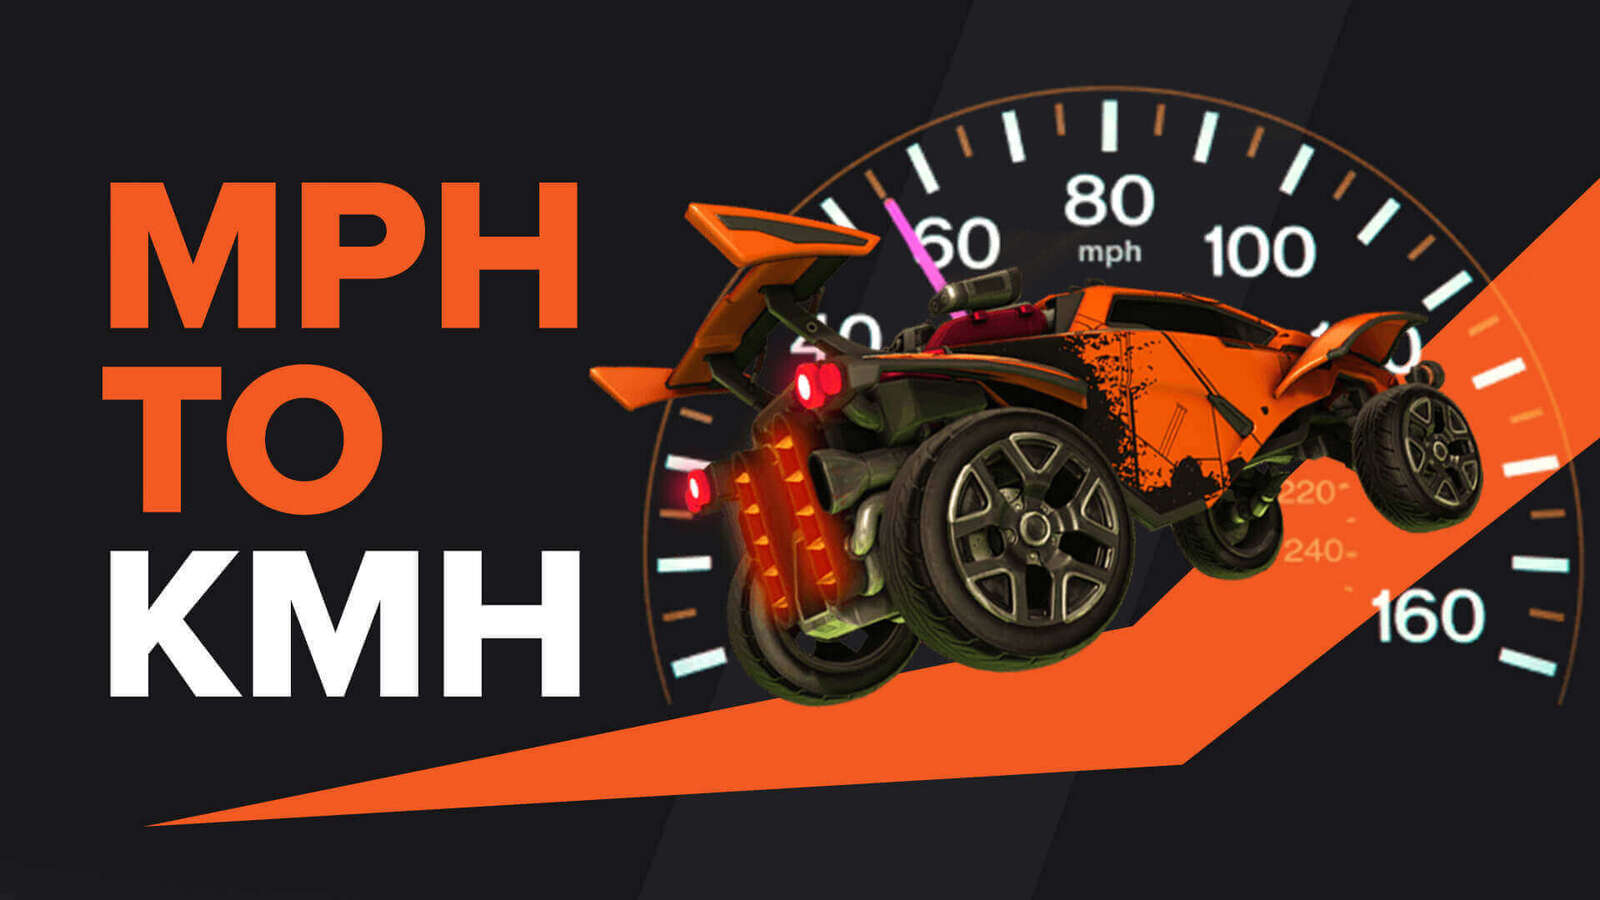 How to change mph to kph in Rocket League